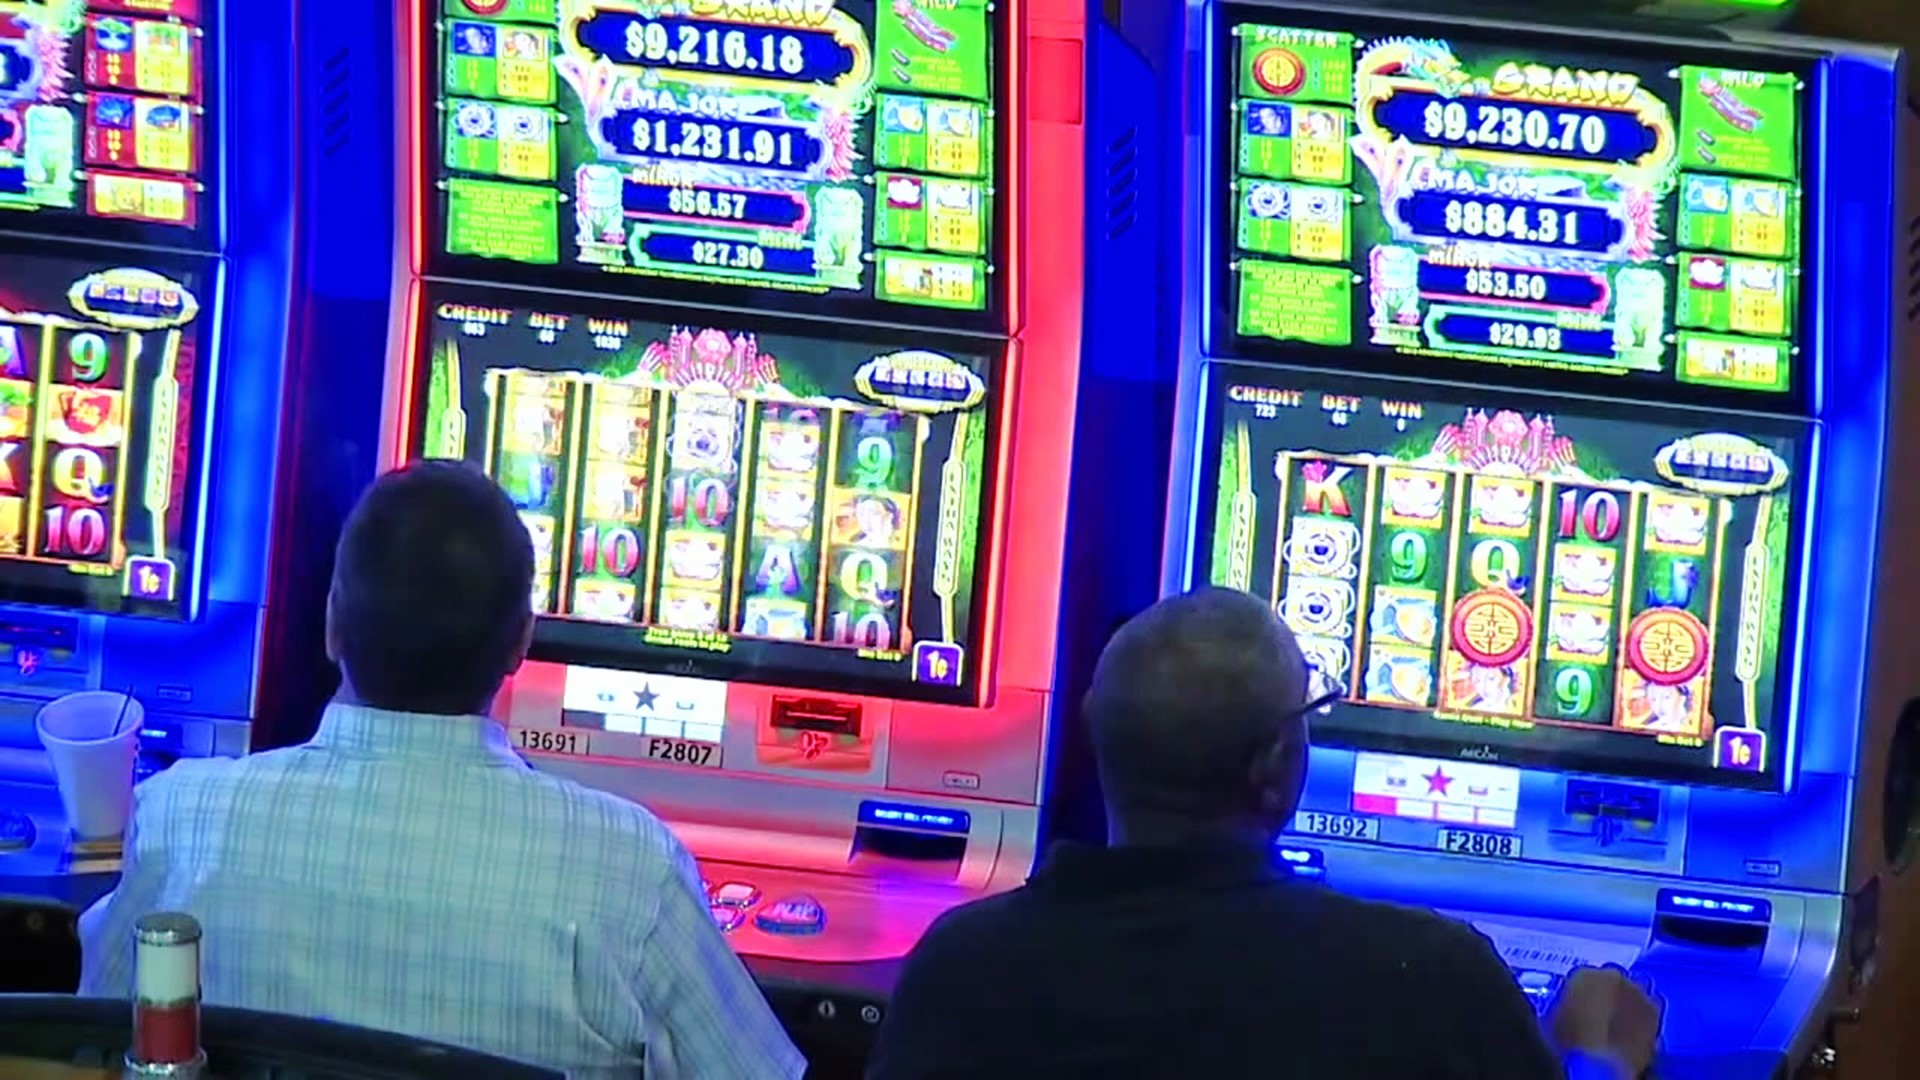 The American Gaming Association says this is the commercial gaming industry's third-straight record revenue year.